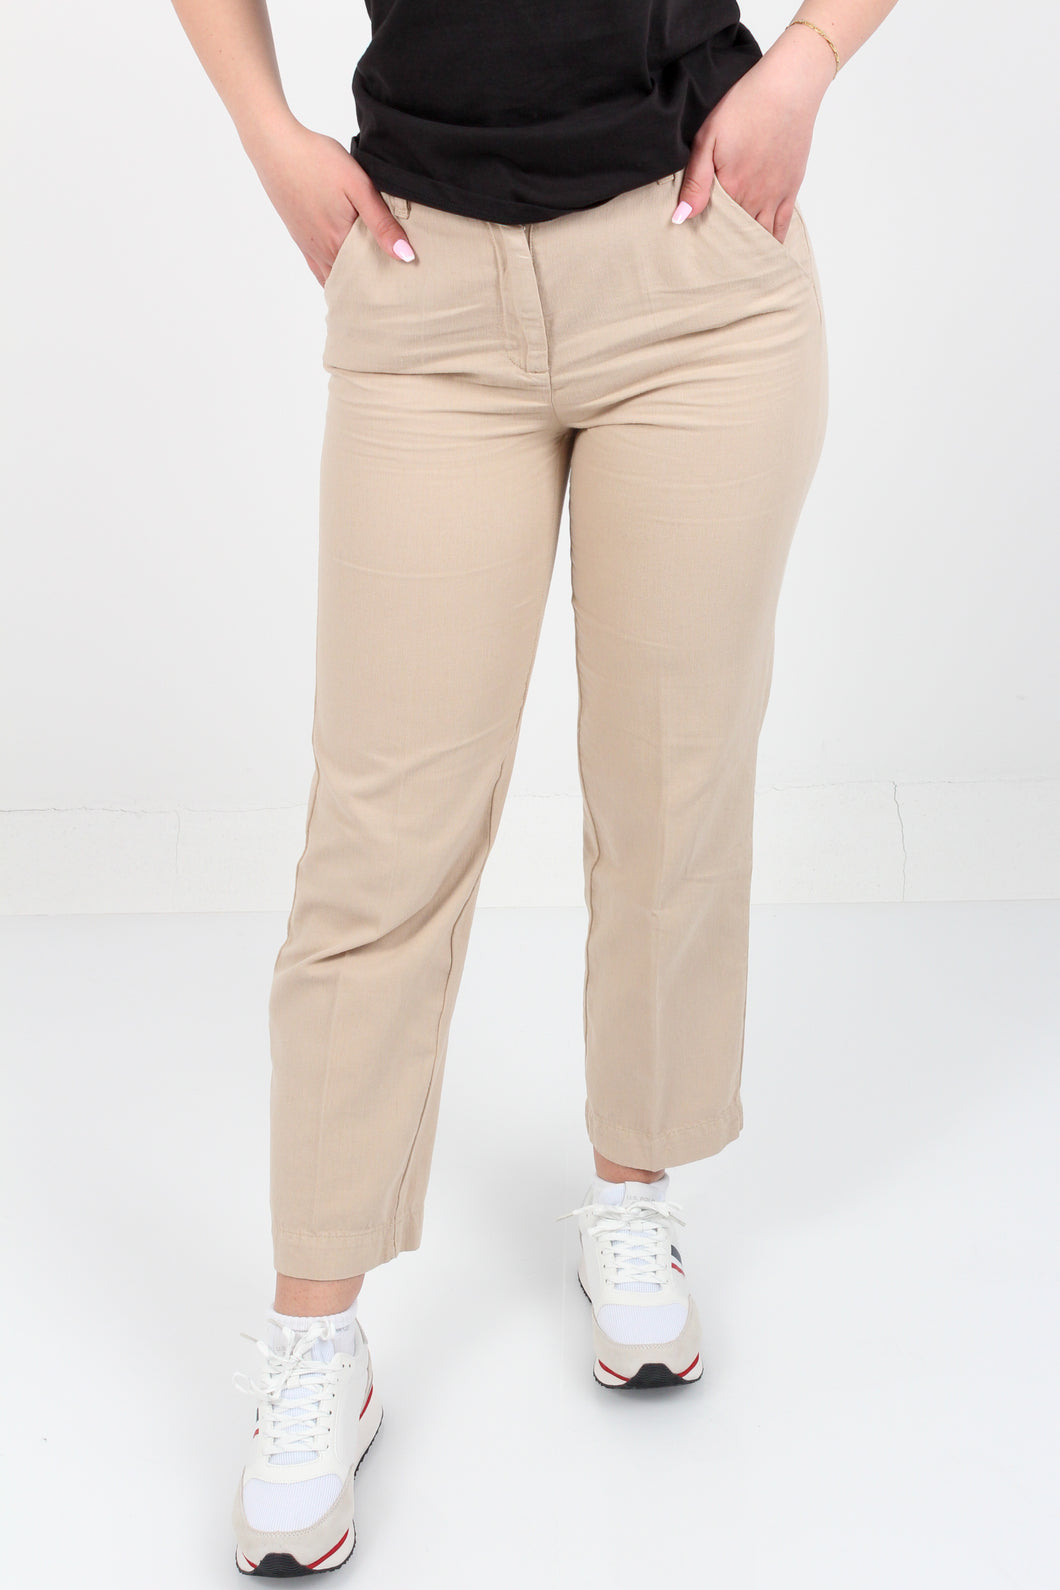 TROUSERS CHINOS PRO